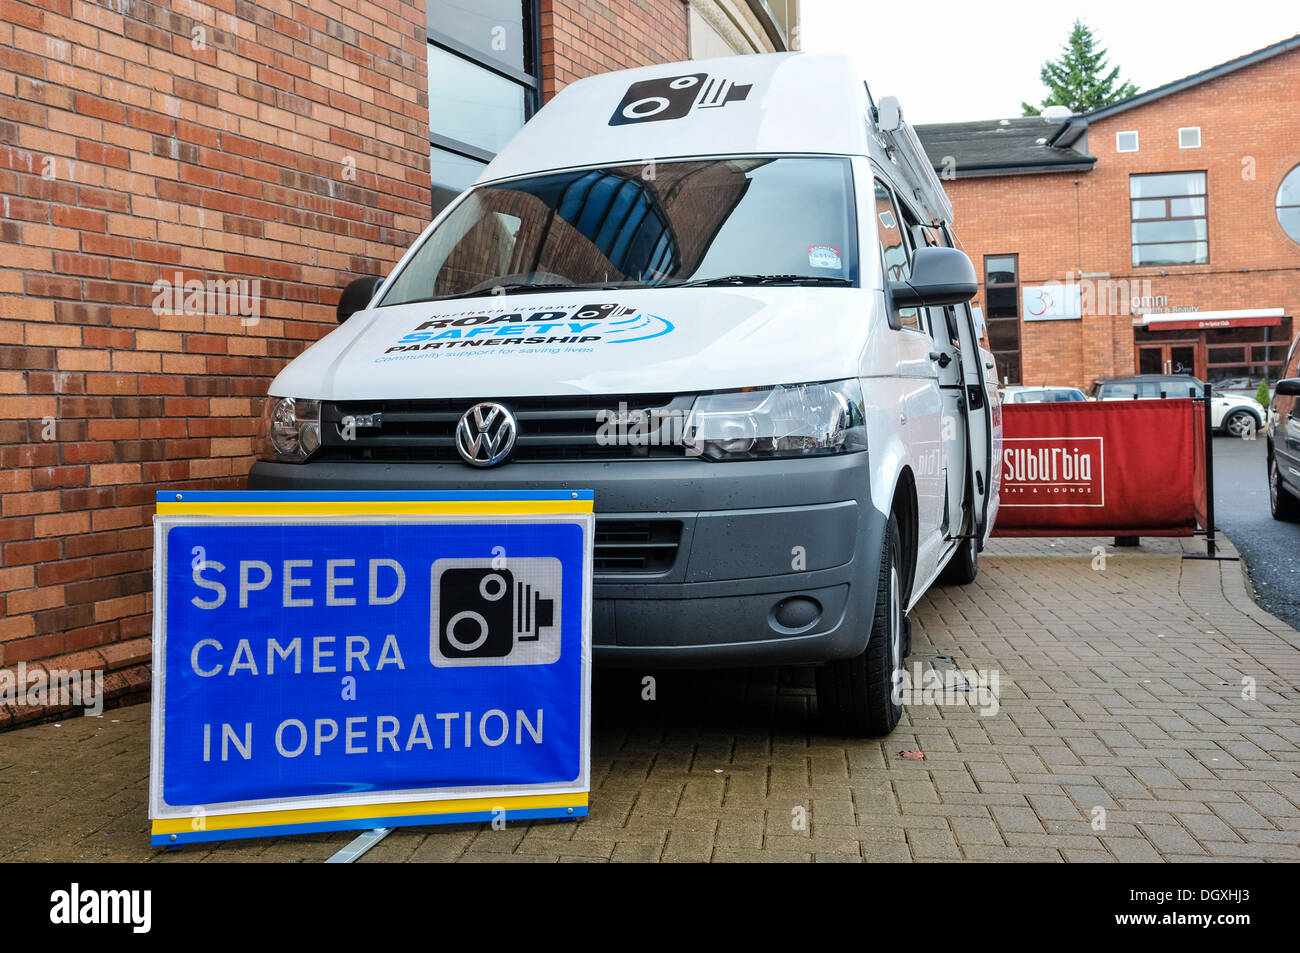 Speed camera van with a sign saying 'Speed Camera in Operation' Stock Photo